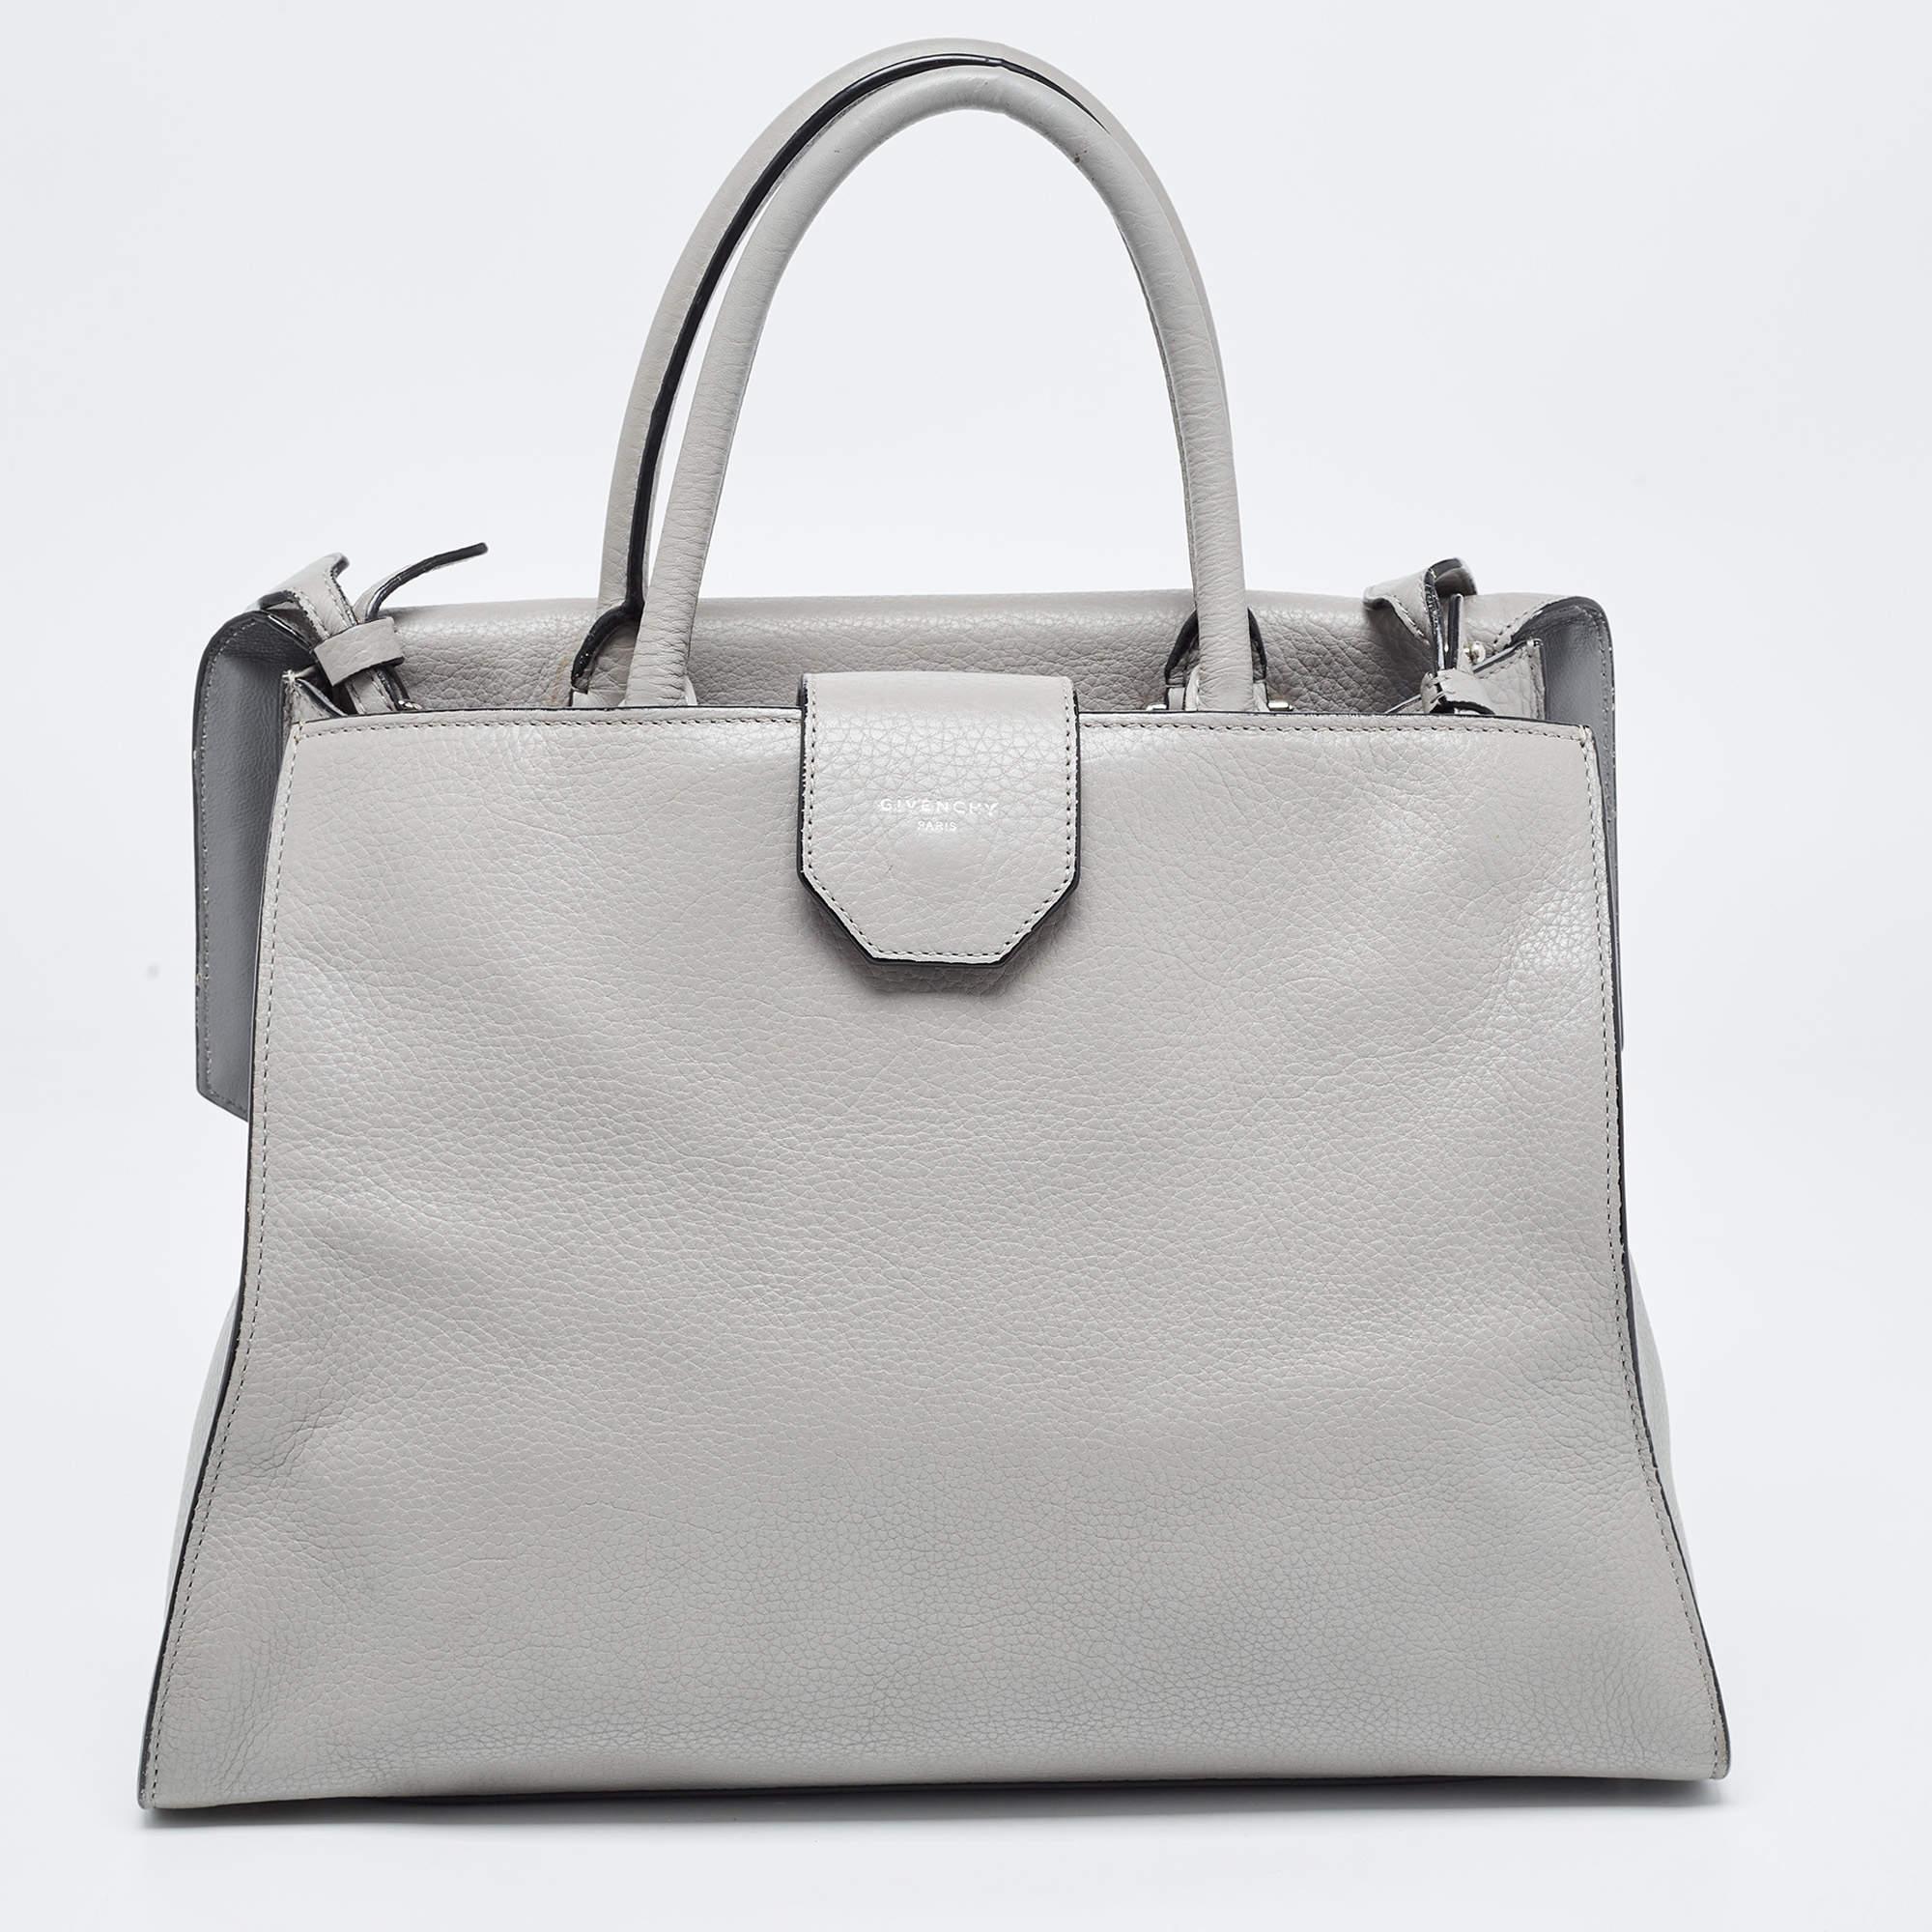 This alluring tote bag for women has been designed to assist you on any day. Convenient to carry and fashionably designed, the tote is cut with skill and sewn into a great shape. It is well-equipped to be a reliable accessory.

Includes: Info Booklet